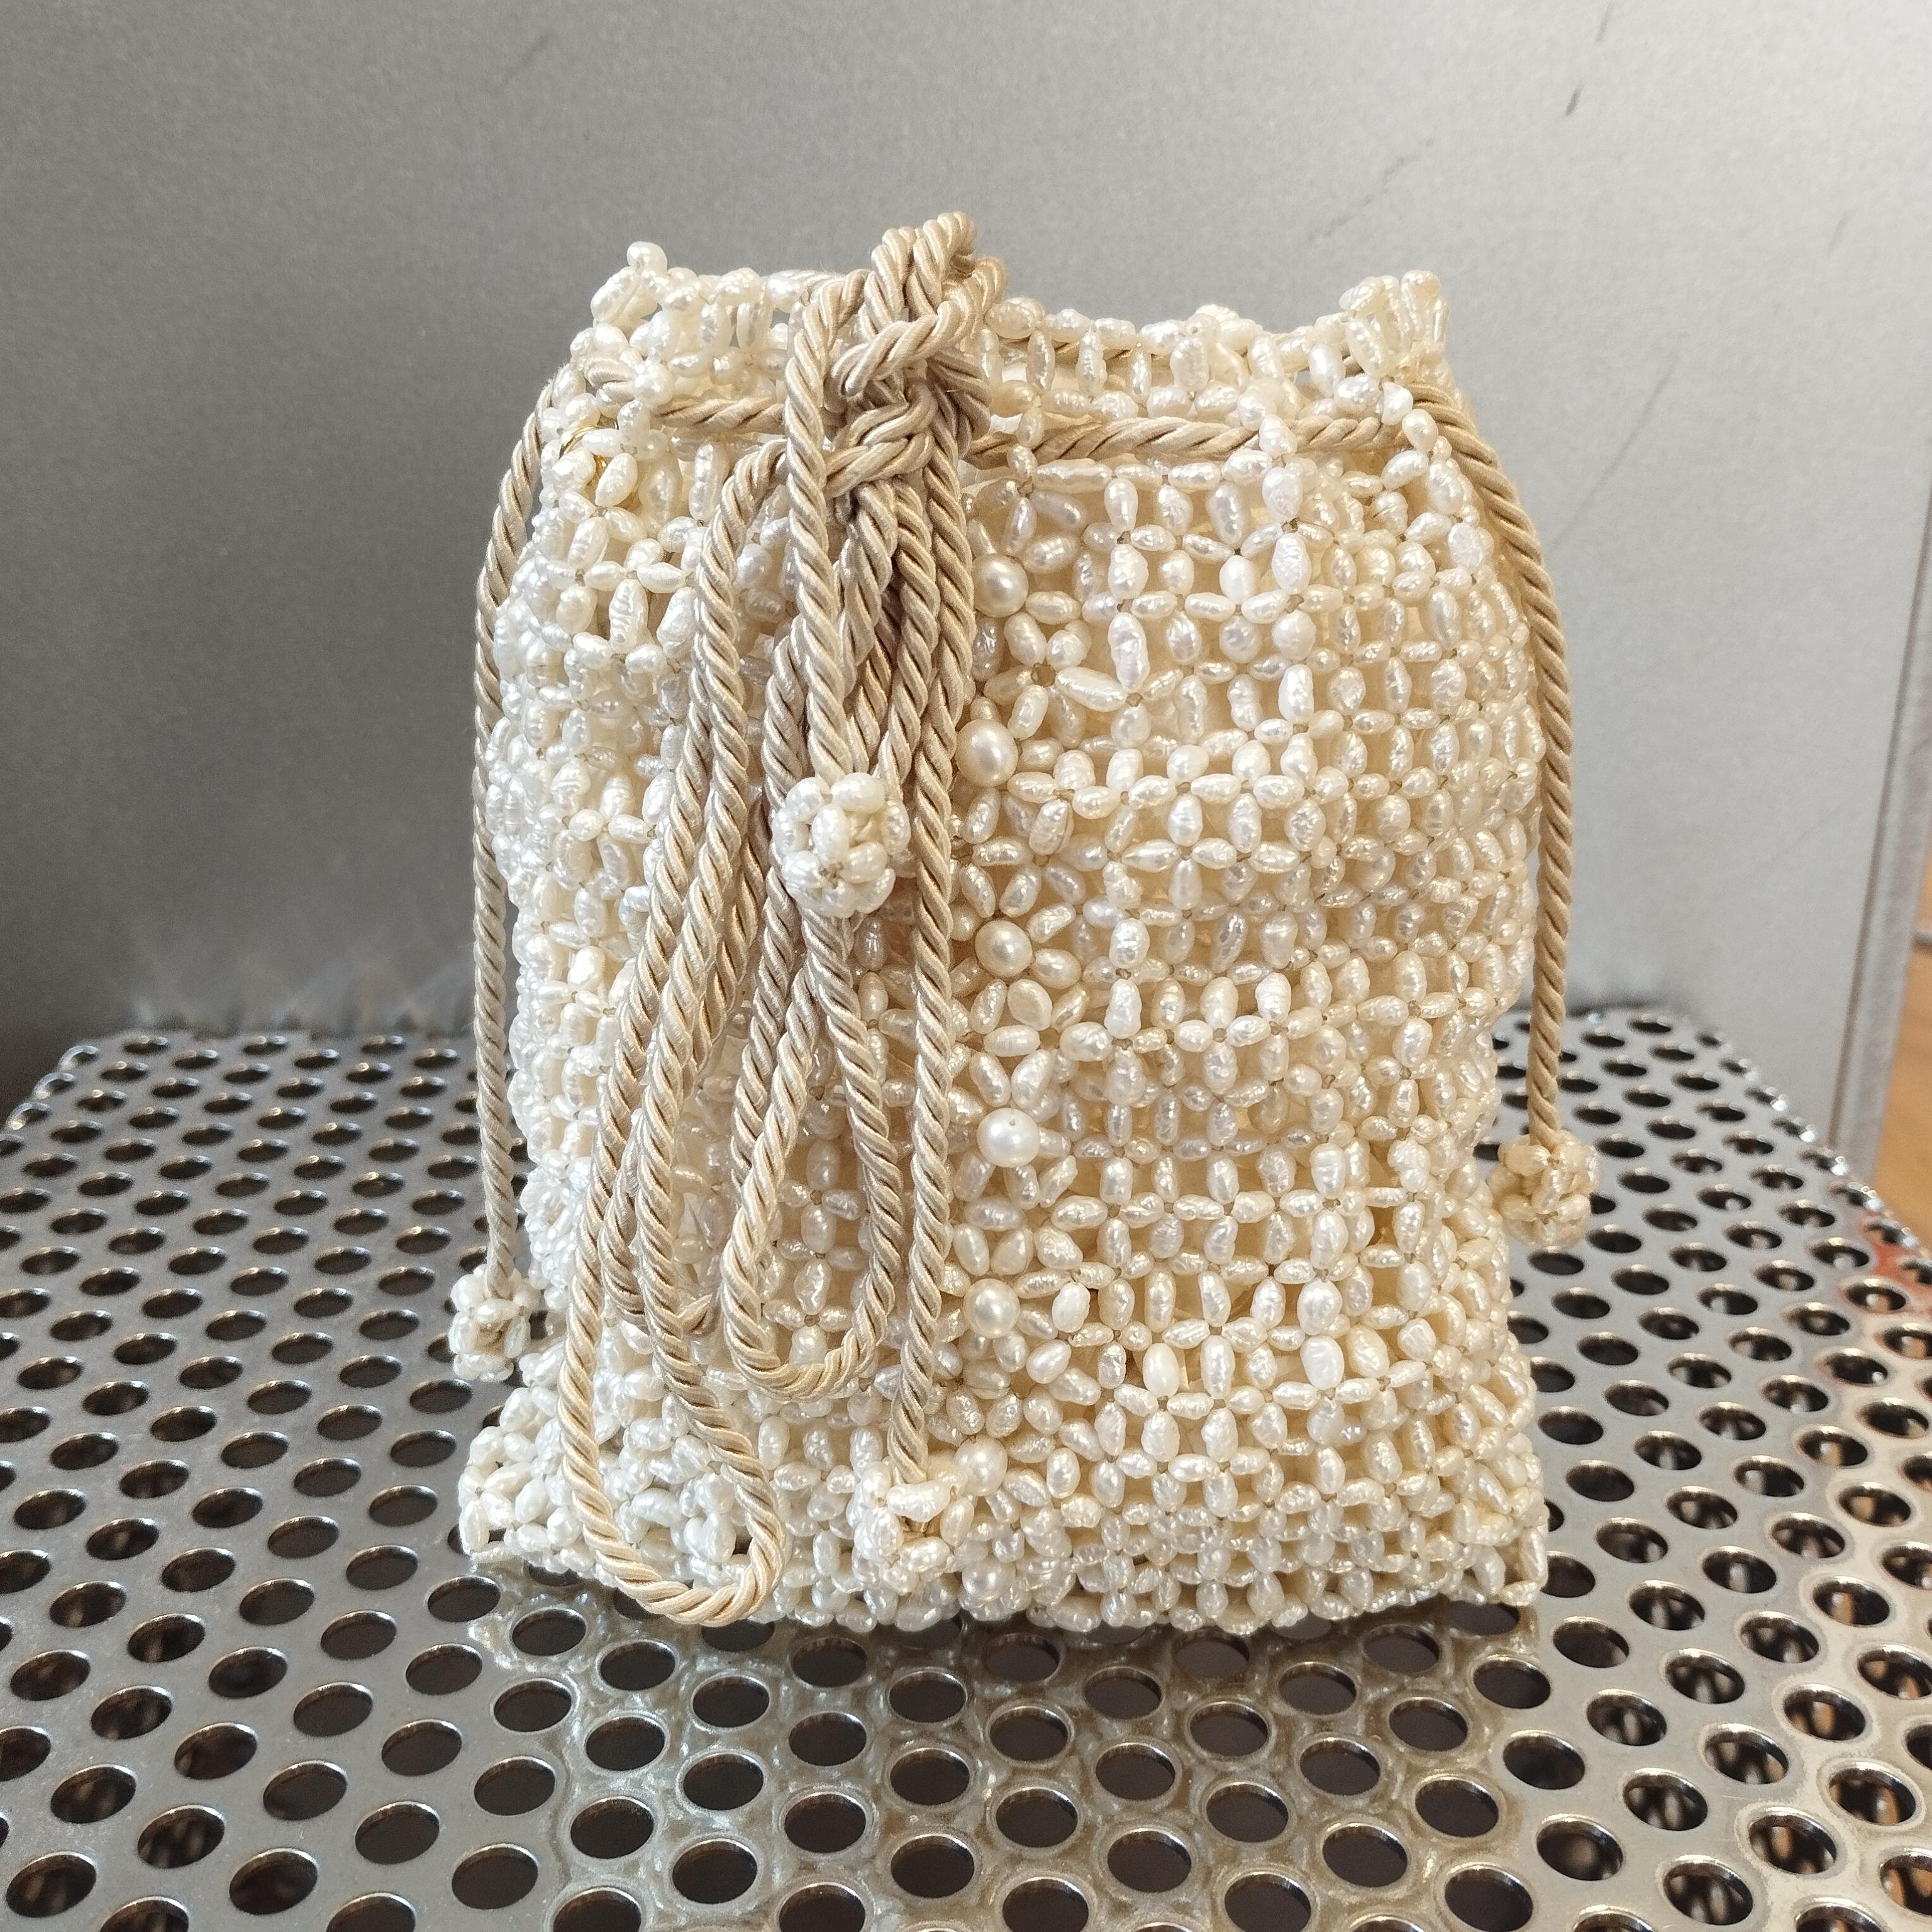 This is a world unique piece made by the legendary Carlo Zini
Completely made in hte best italian artianal way
River pearls embroidered one by one
Can be worn crossbody
Cm 12 x 15 (4,72 x 5,9 inches)
It is a perfect piece for an elegant dinner or a